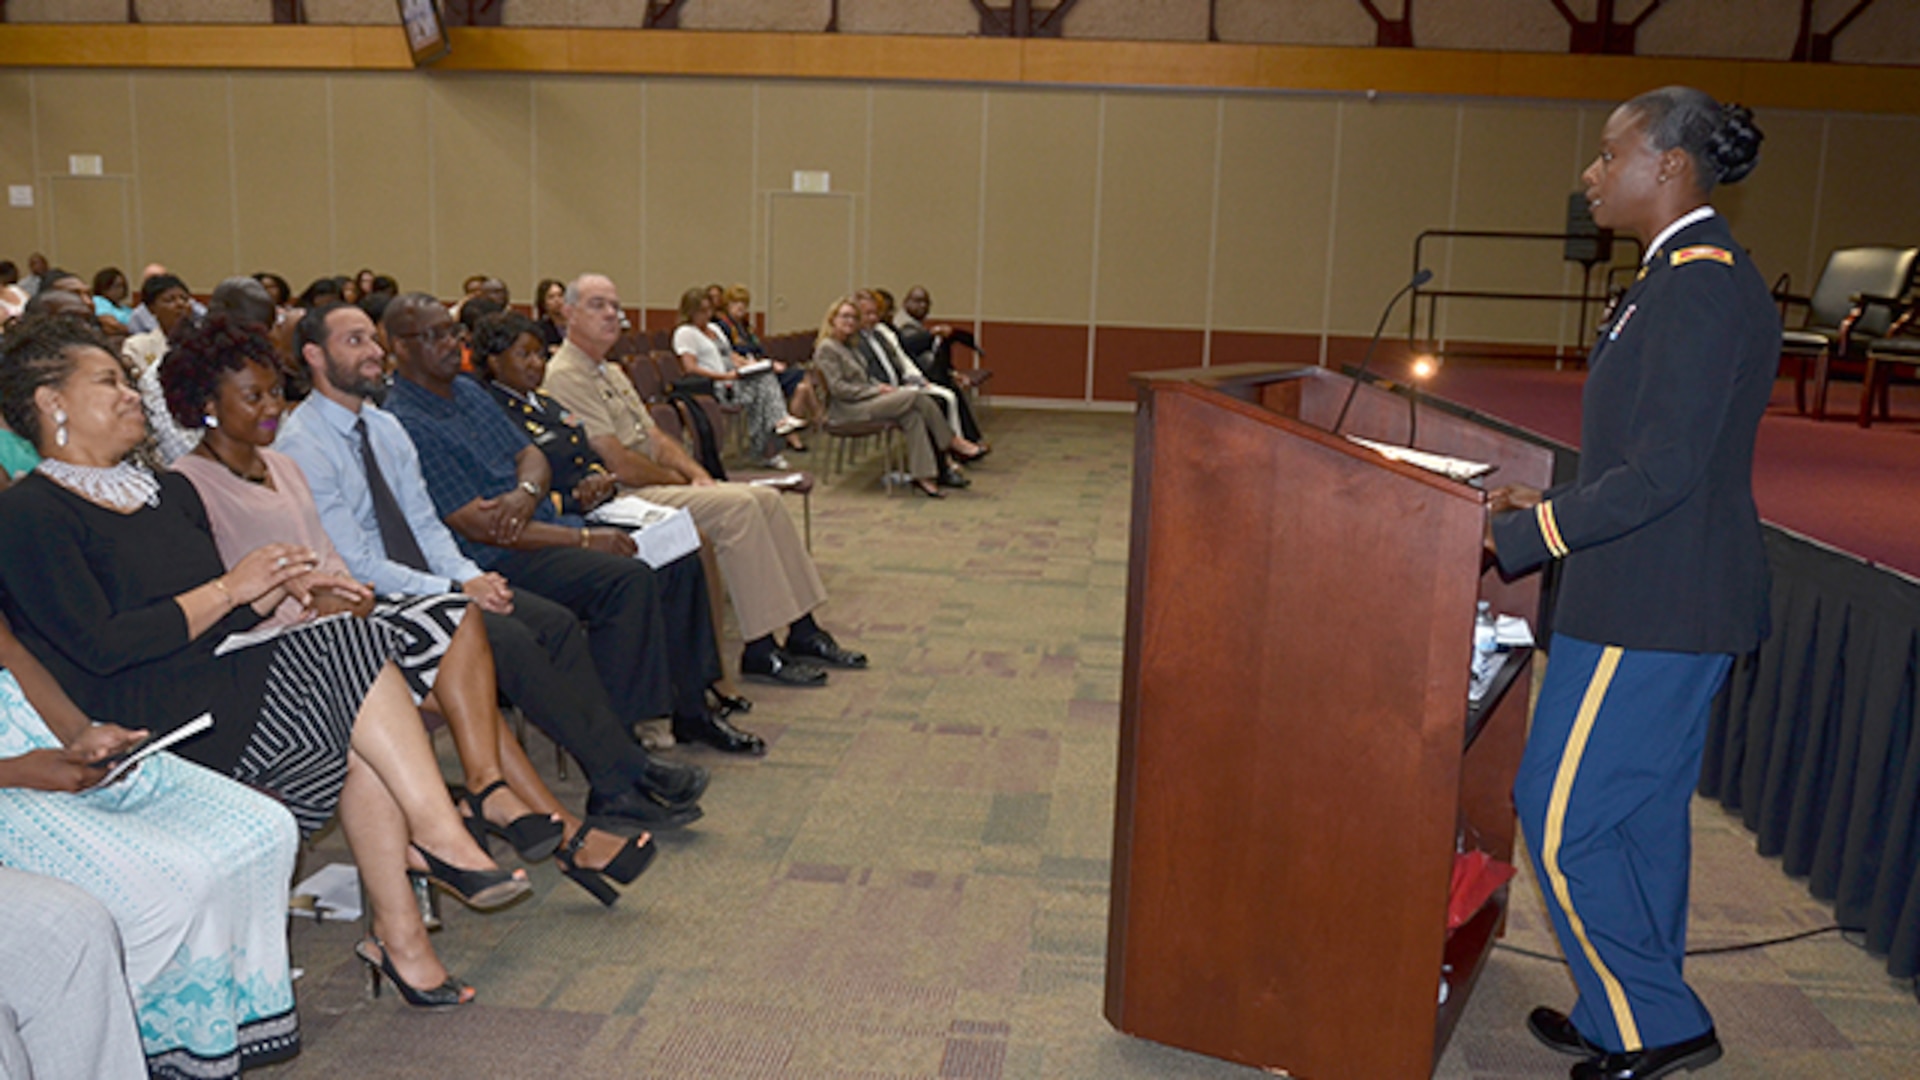 Defense Logistics Agency Aviation's Army Col. Kim Thomas, deputy director for Strategic Acquisition Programs Directorate speaks to Richmond employees during the Women's Equality Day celebration on Defense Supply Center Richmond, Virginia, August 31, 2016. Thomas is a decorated military leader with over 21 years of commissioned service and spoke on her career,  personal mentors and the importance of celebrating Women's Equality Day.